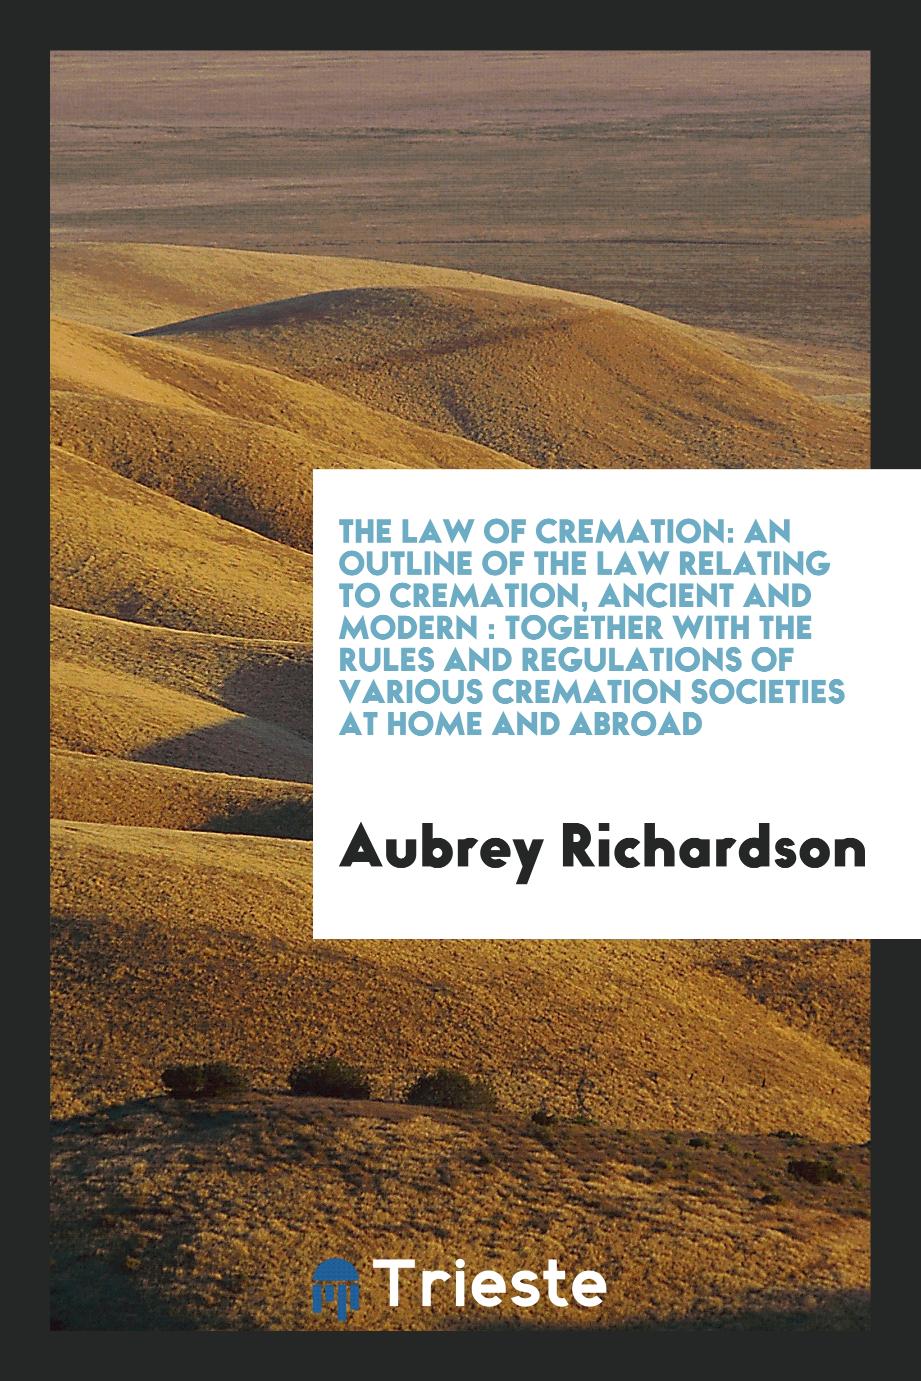 The law of cremation: an outline of the law relating to cremation, ancient and modern : together with the rules and regulations of various cremation societies at home and abroad